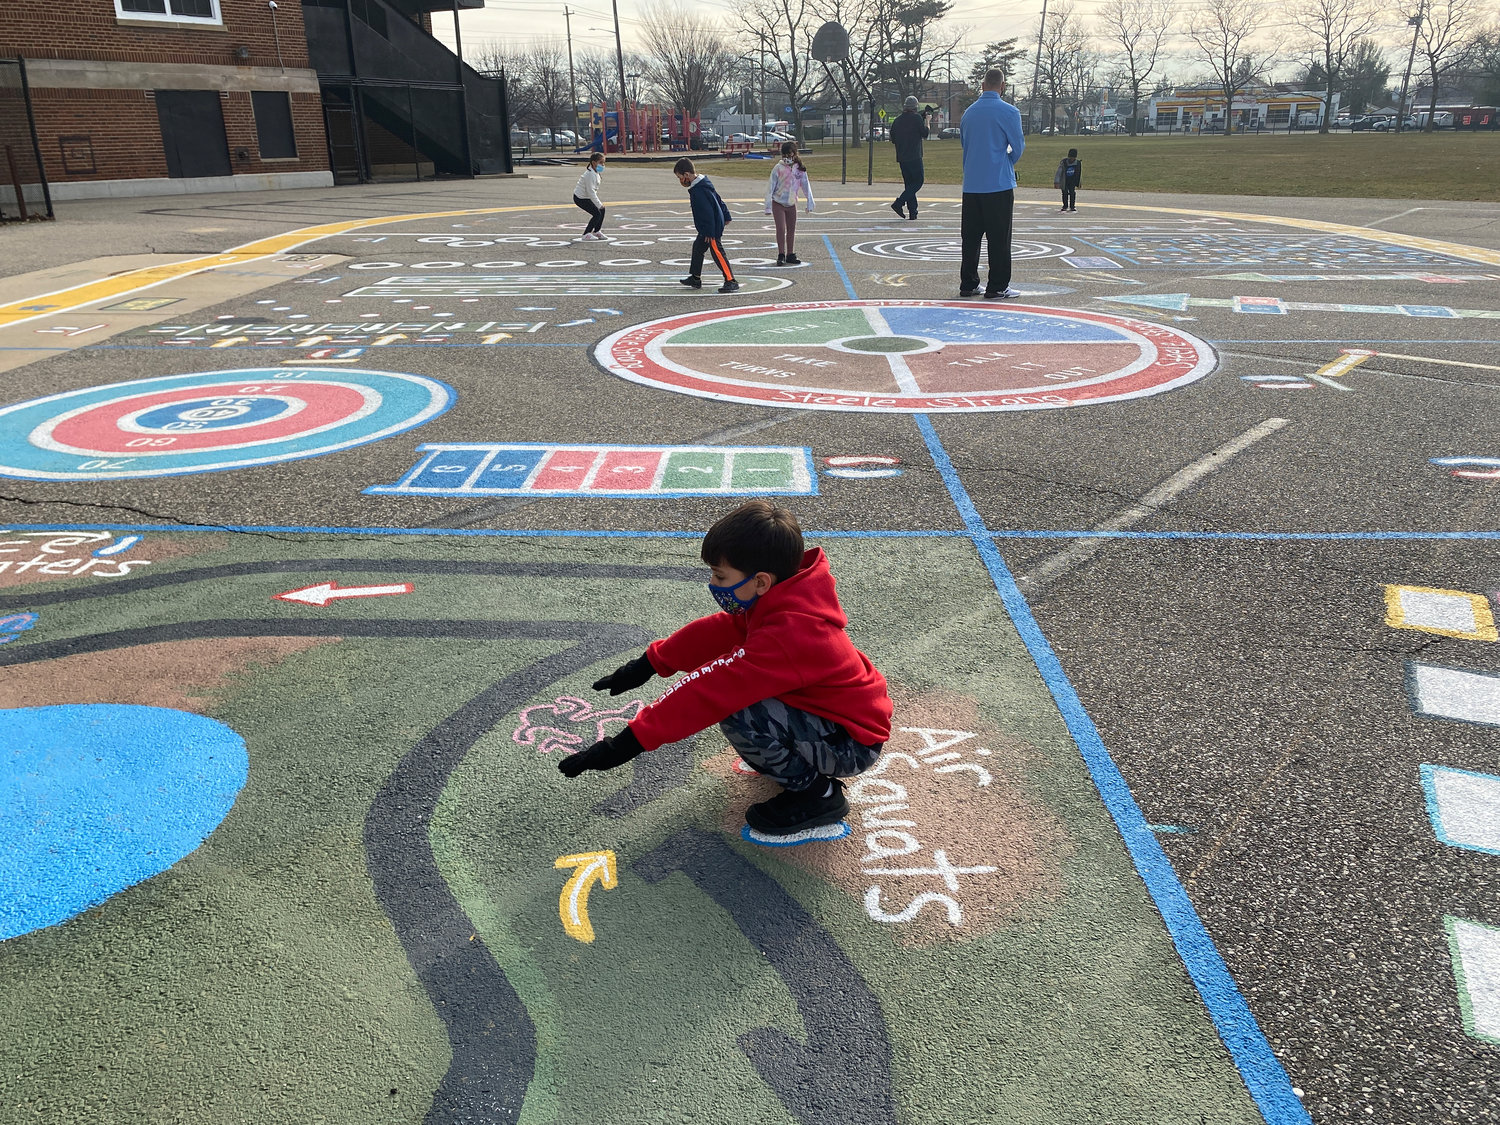 Students participated in fun exercise routines using the activity wheel in the schoolyard.